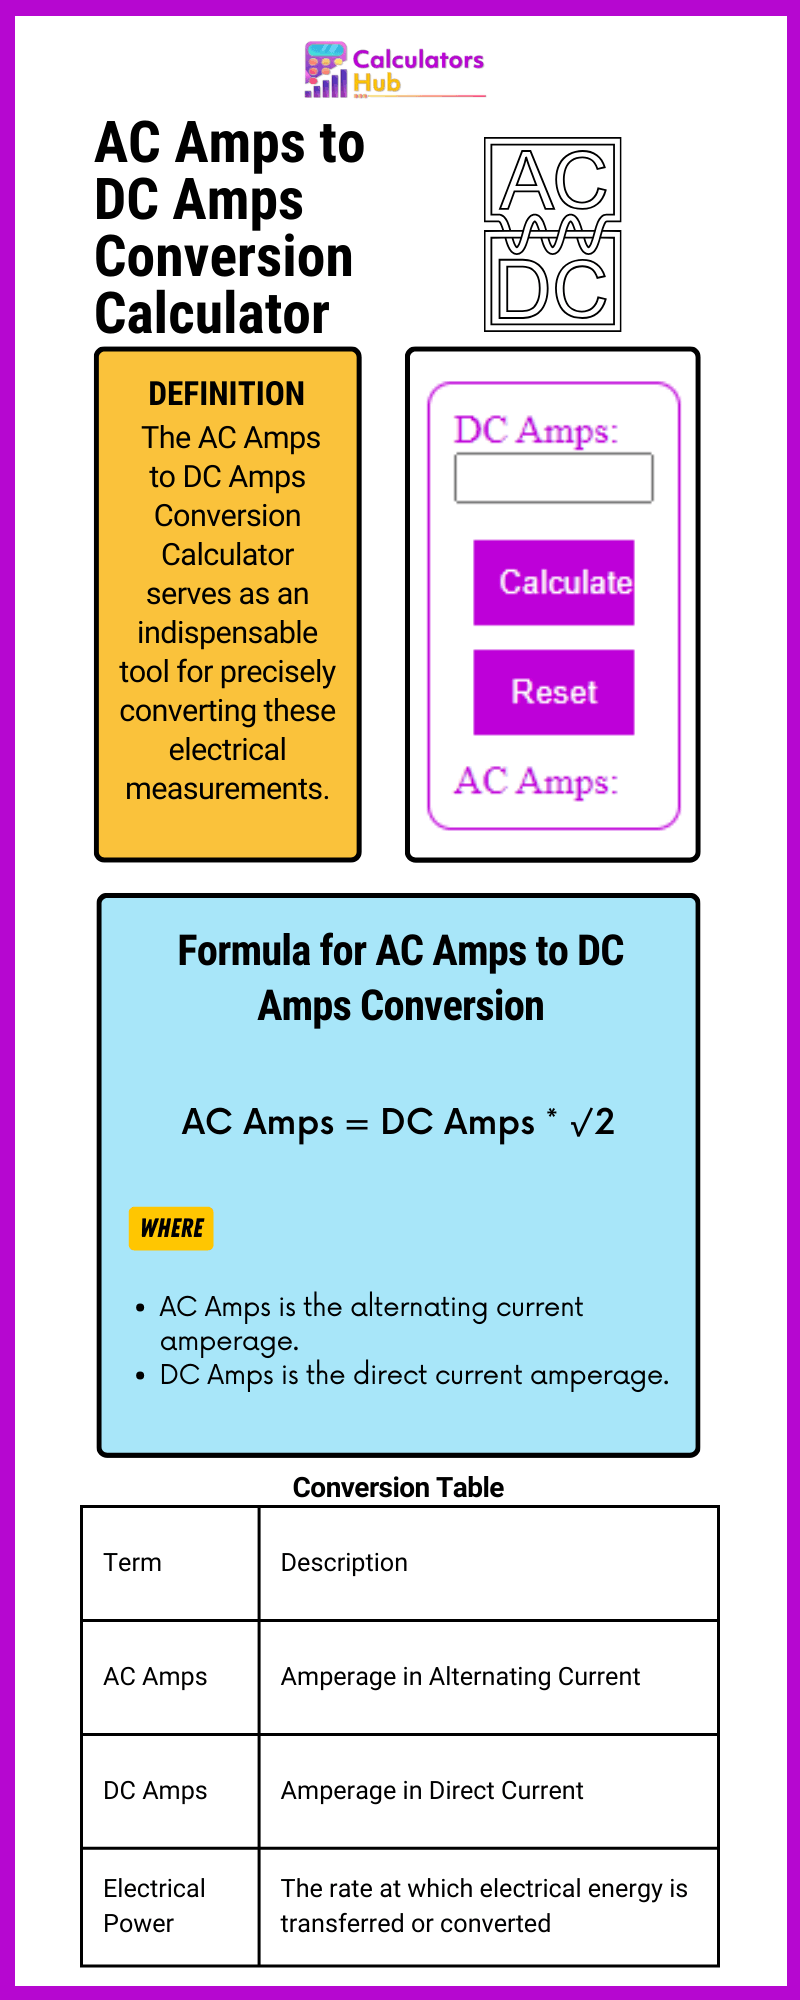 AC Amps to DC Amps Conversion Calculator